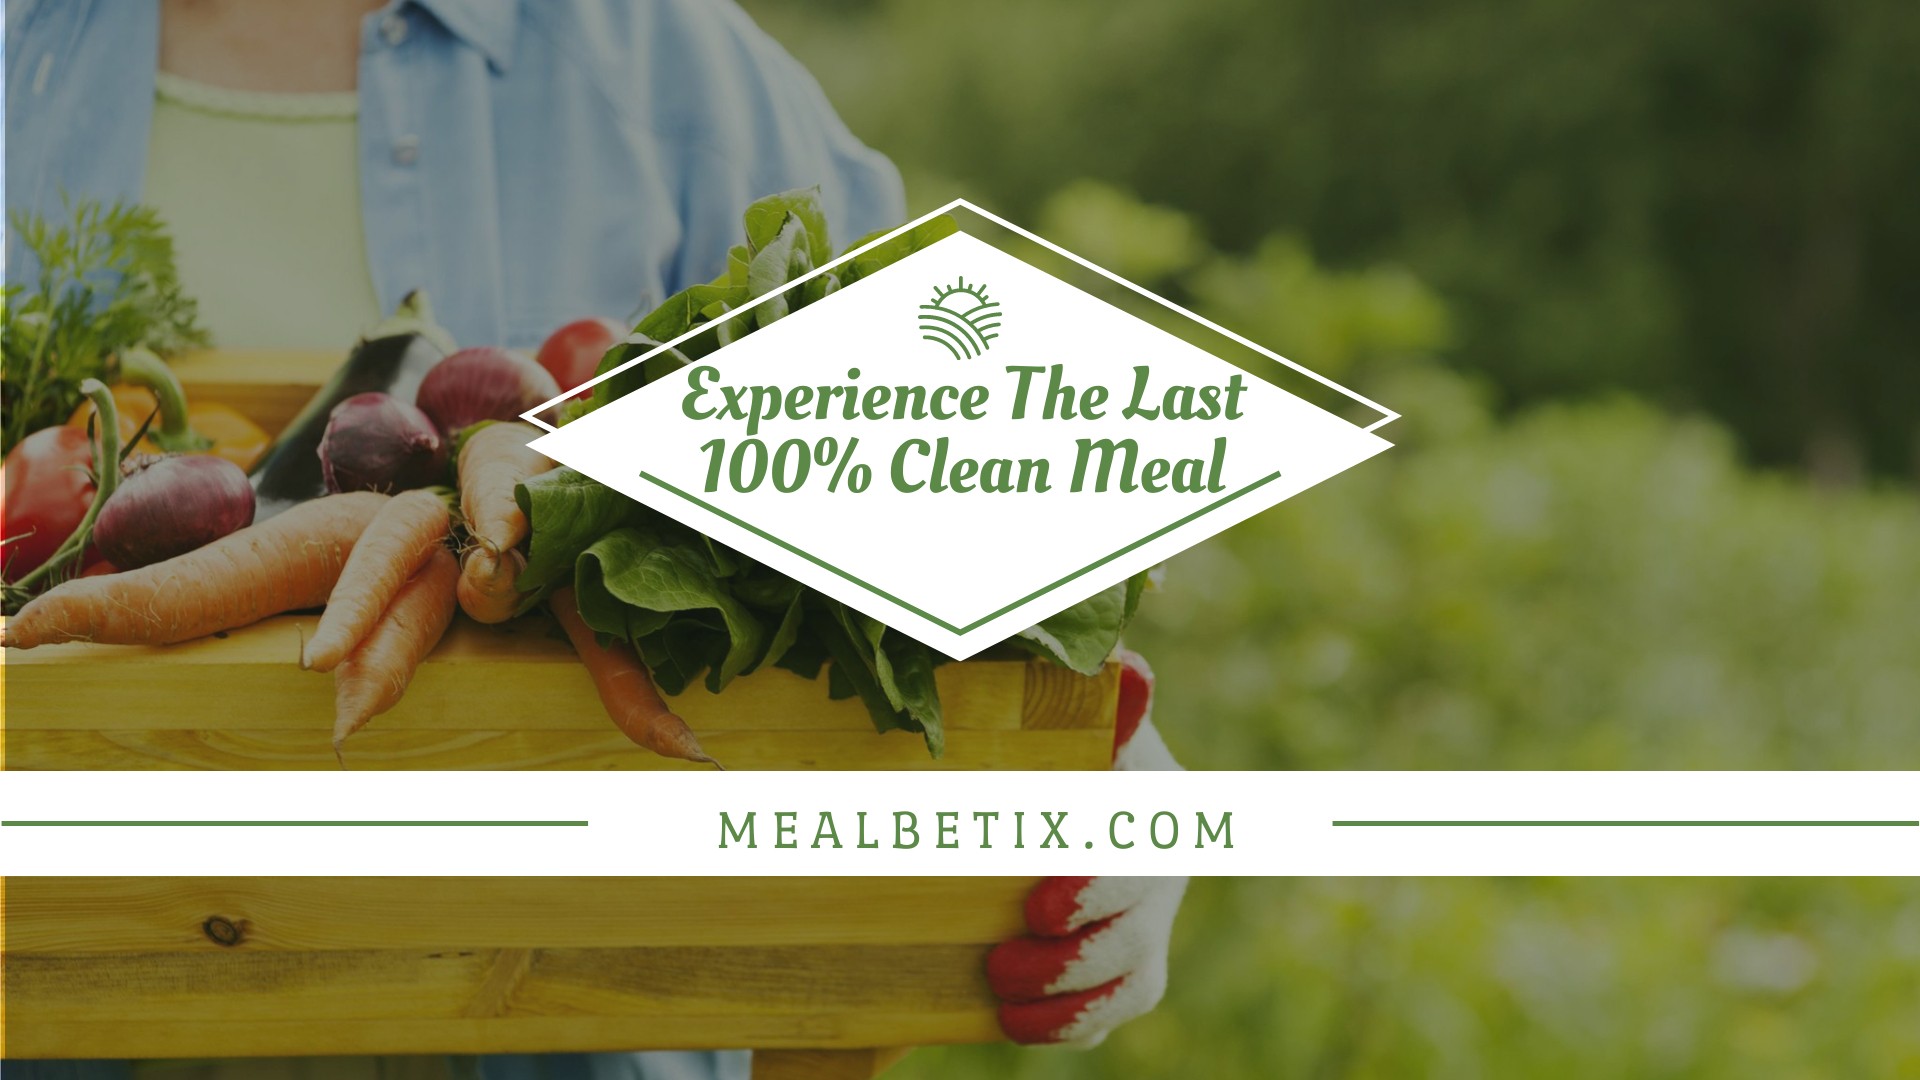 EXPERIENCE THE LAST 100% CLEAN MEAL